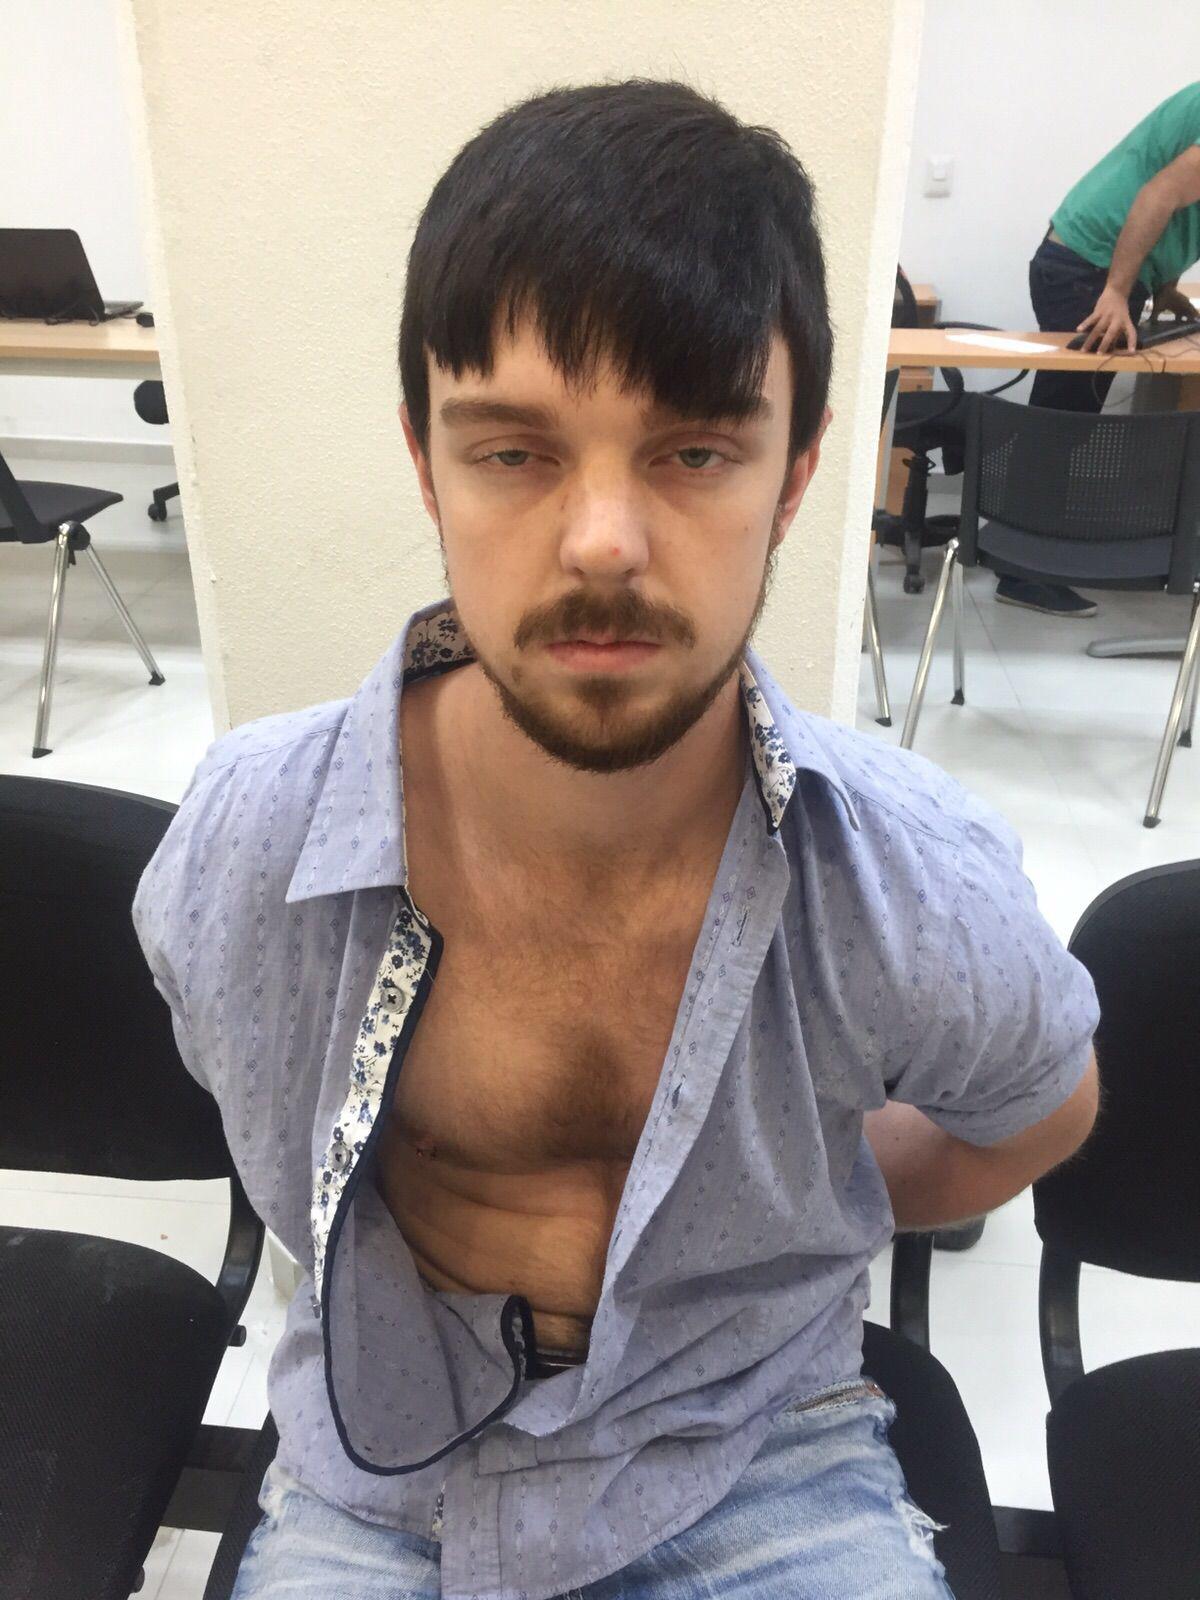 PHOTO: A photograph released by the Jalisco State Prosecutor's Office shows American teen Ethan Couch, who was detained in Mexico on Dec. 28, 2015.